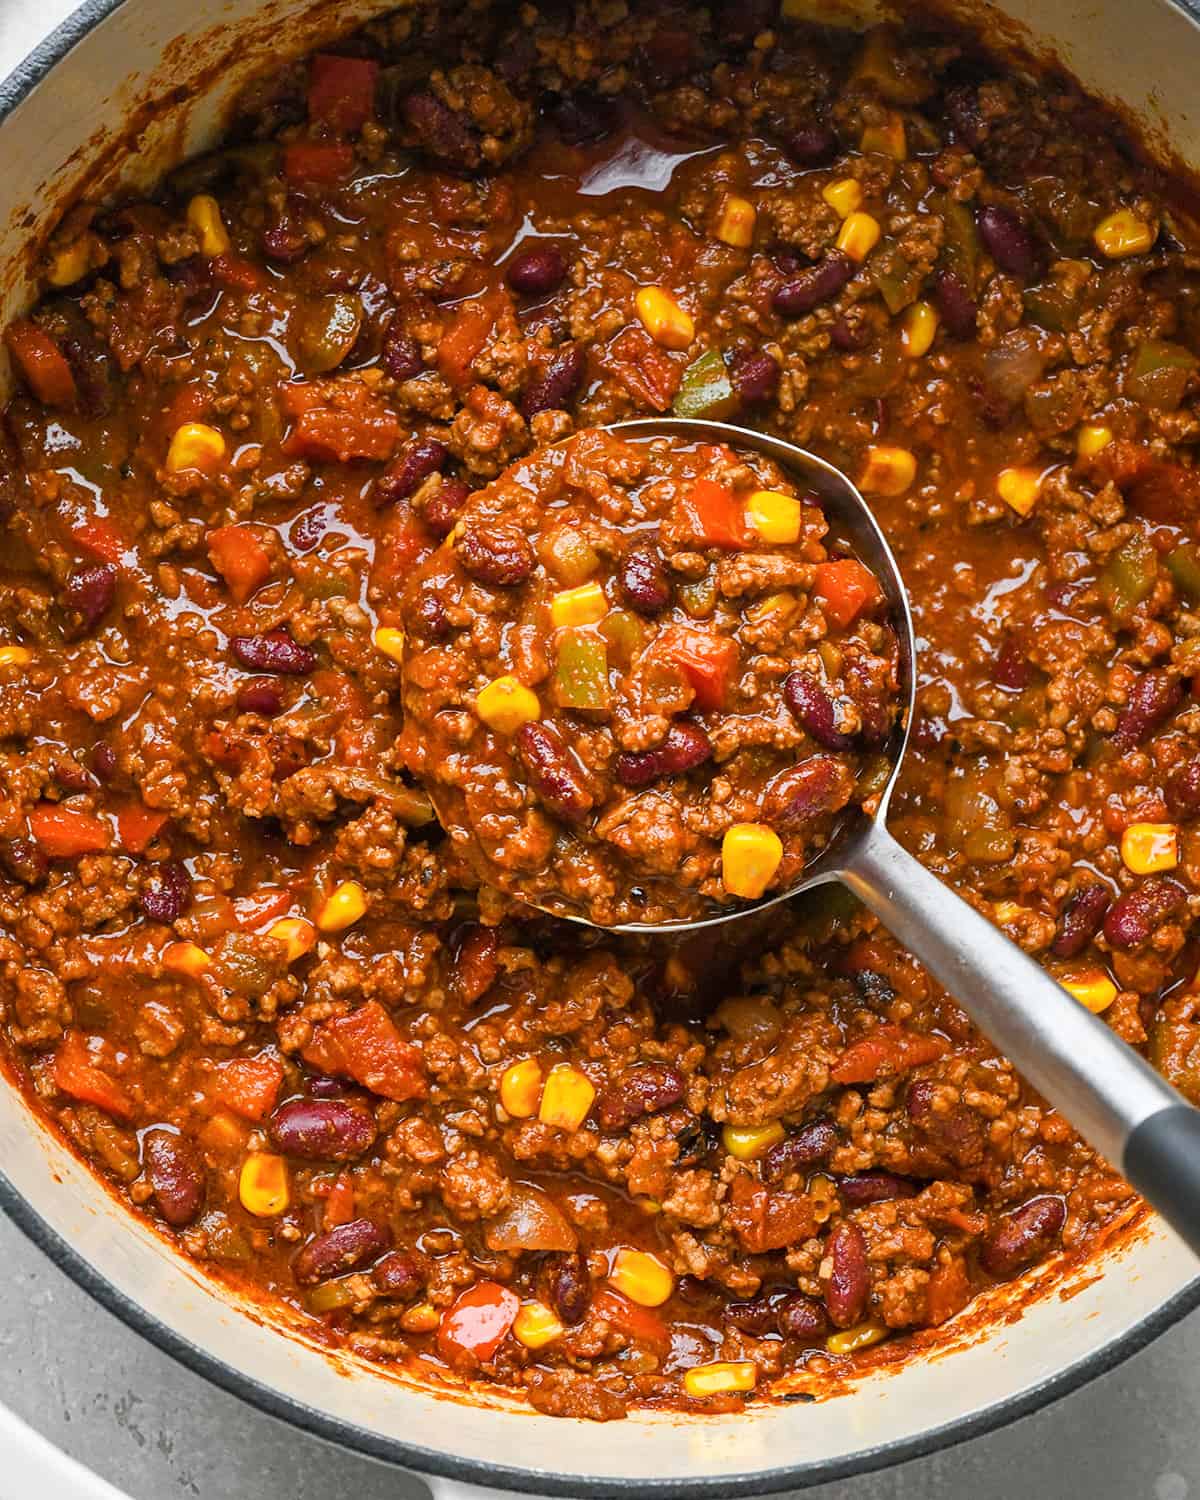 a ladle taking a scoop of Easy Chili Recipe from the pot